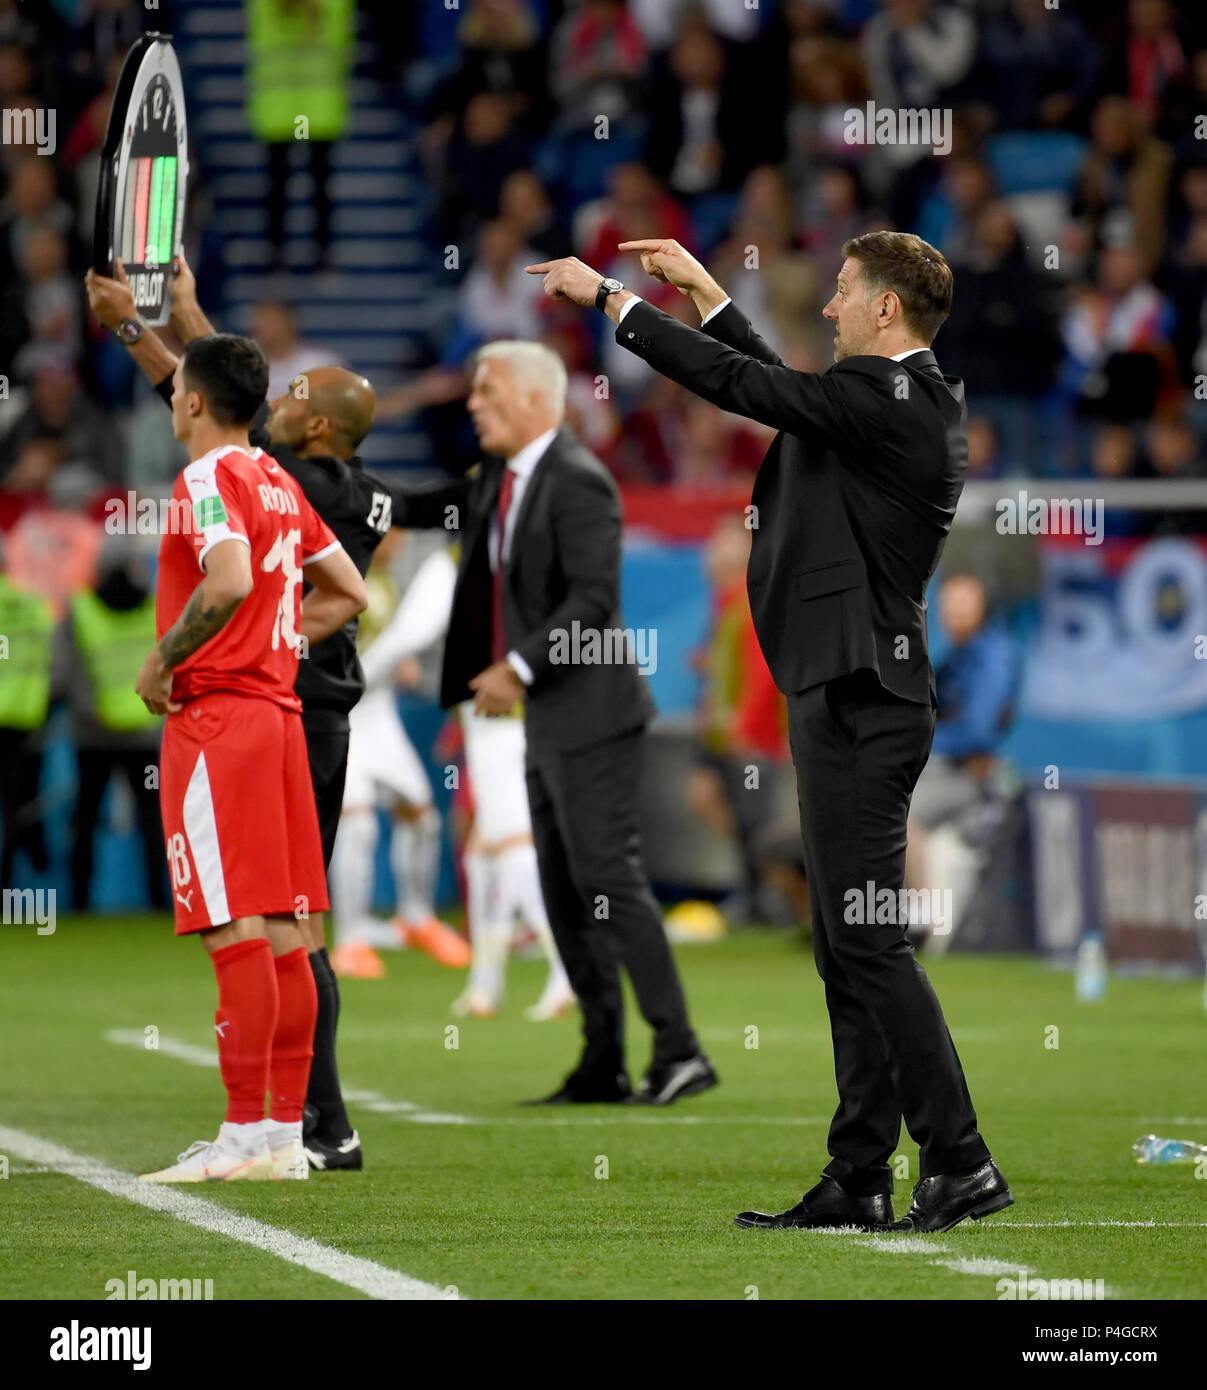 Kaliningrad, Russia. 22nd June, 2018. Serbia's head coach Mladen Krstajic (R) gives instructions to players during the 2018 FIFA World Cup Group E match between Switzerland and Serbia in Kaliningrad, Russia, June 22, 2018. Credit: Chen Cheng/Xinhua/Alamy Live News Stock Photo